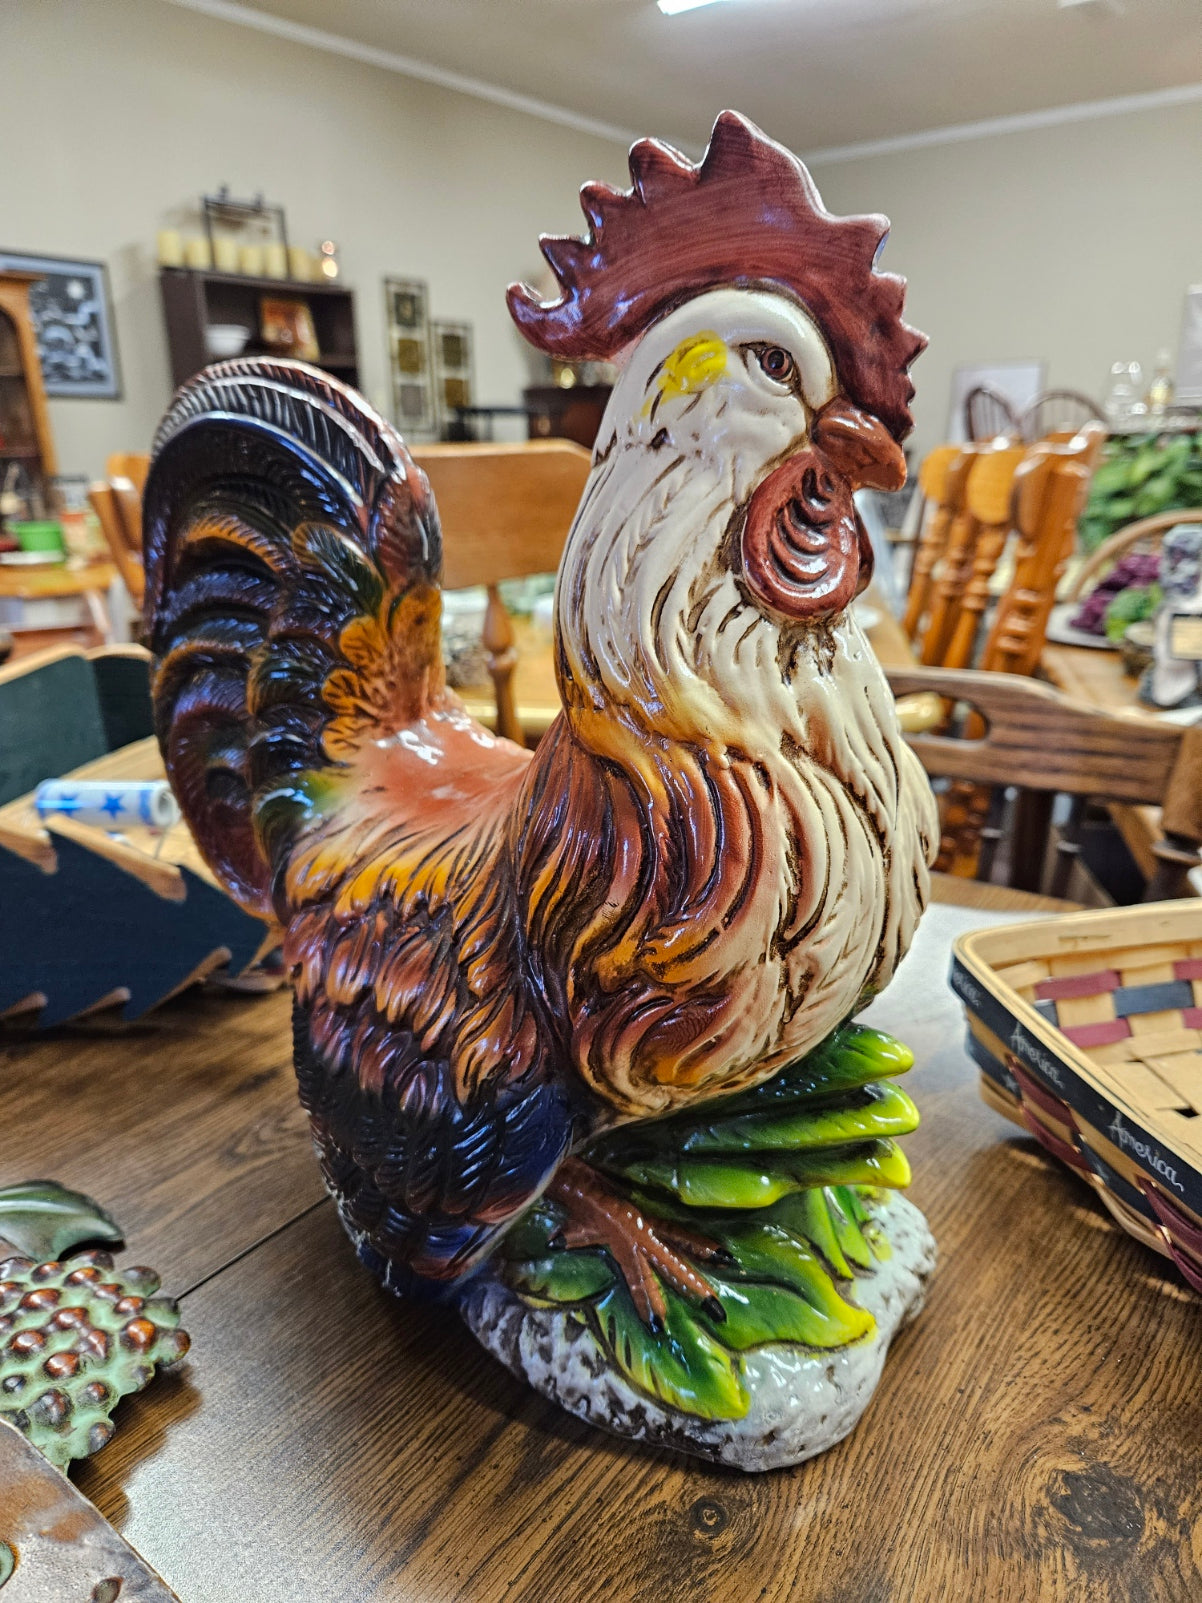 Large Ceramic Rooster